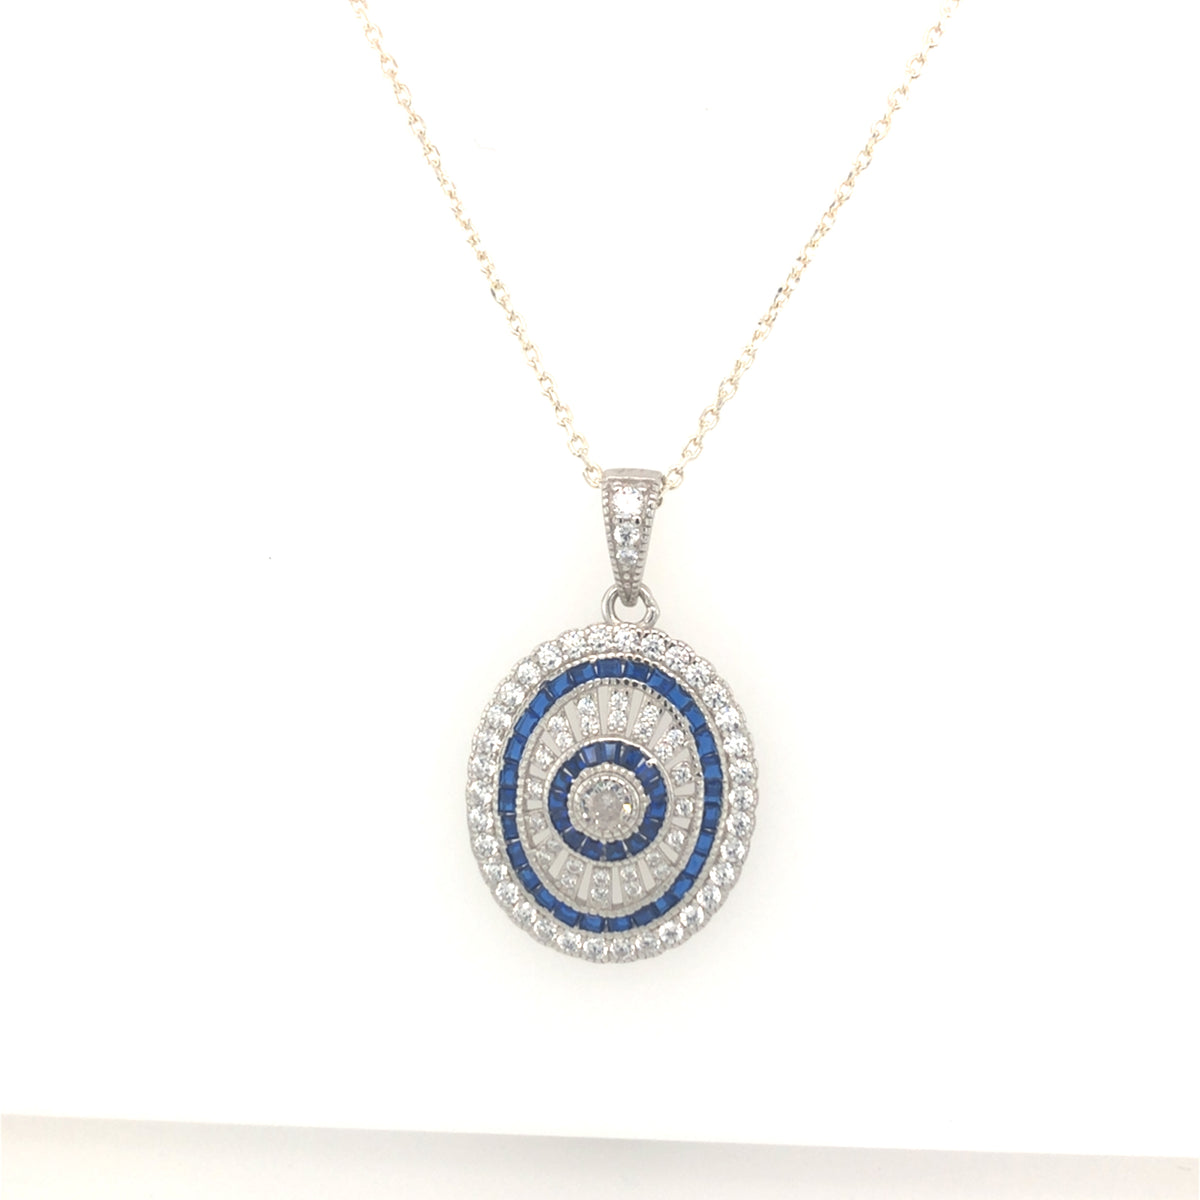 Sterling Silver Stone set Oval Pendant with Sapphire Coloured Stones